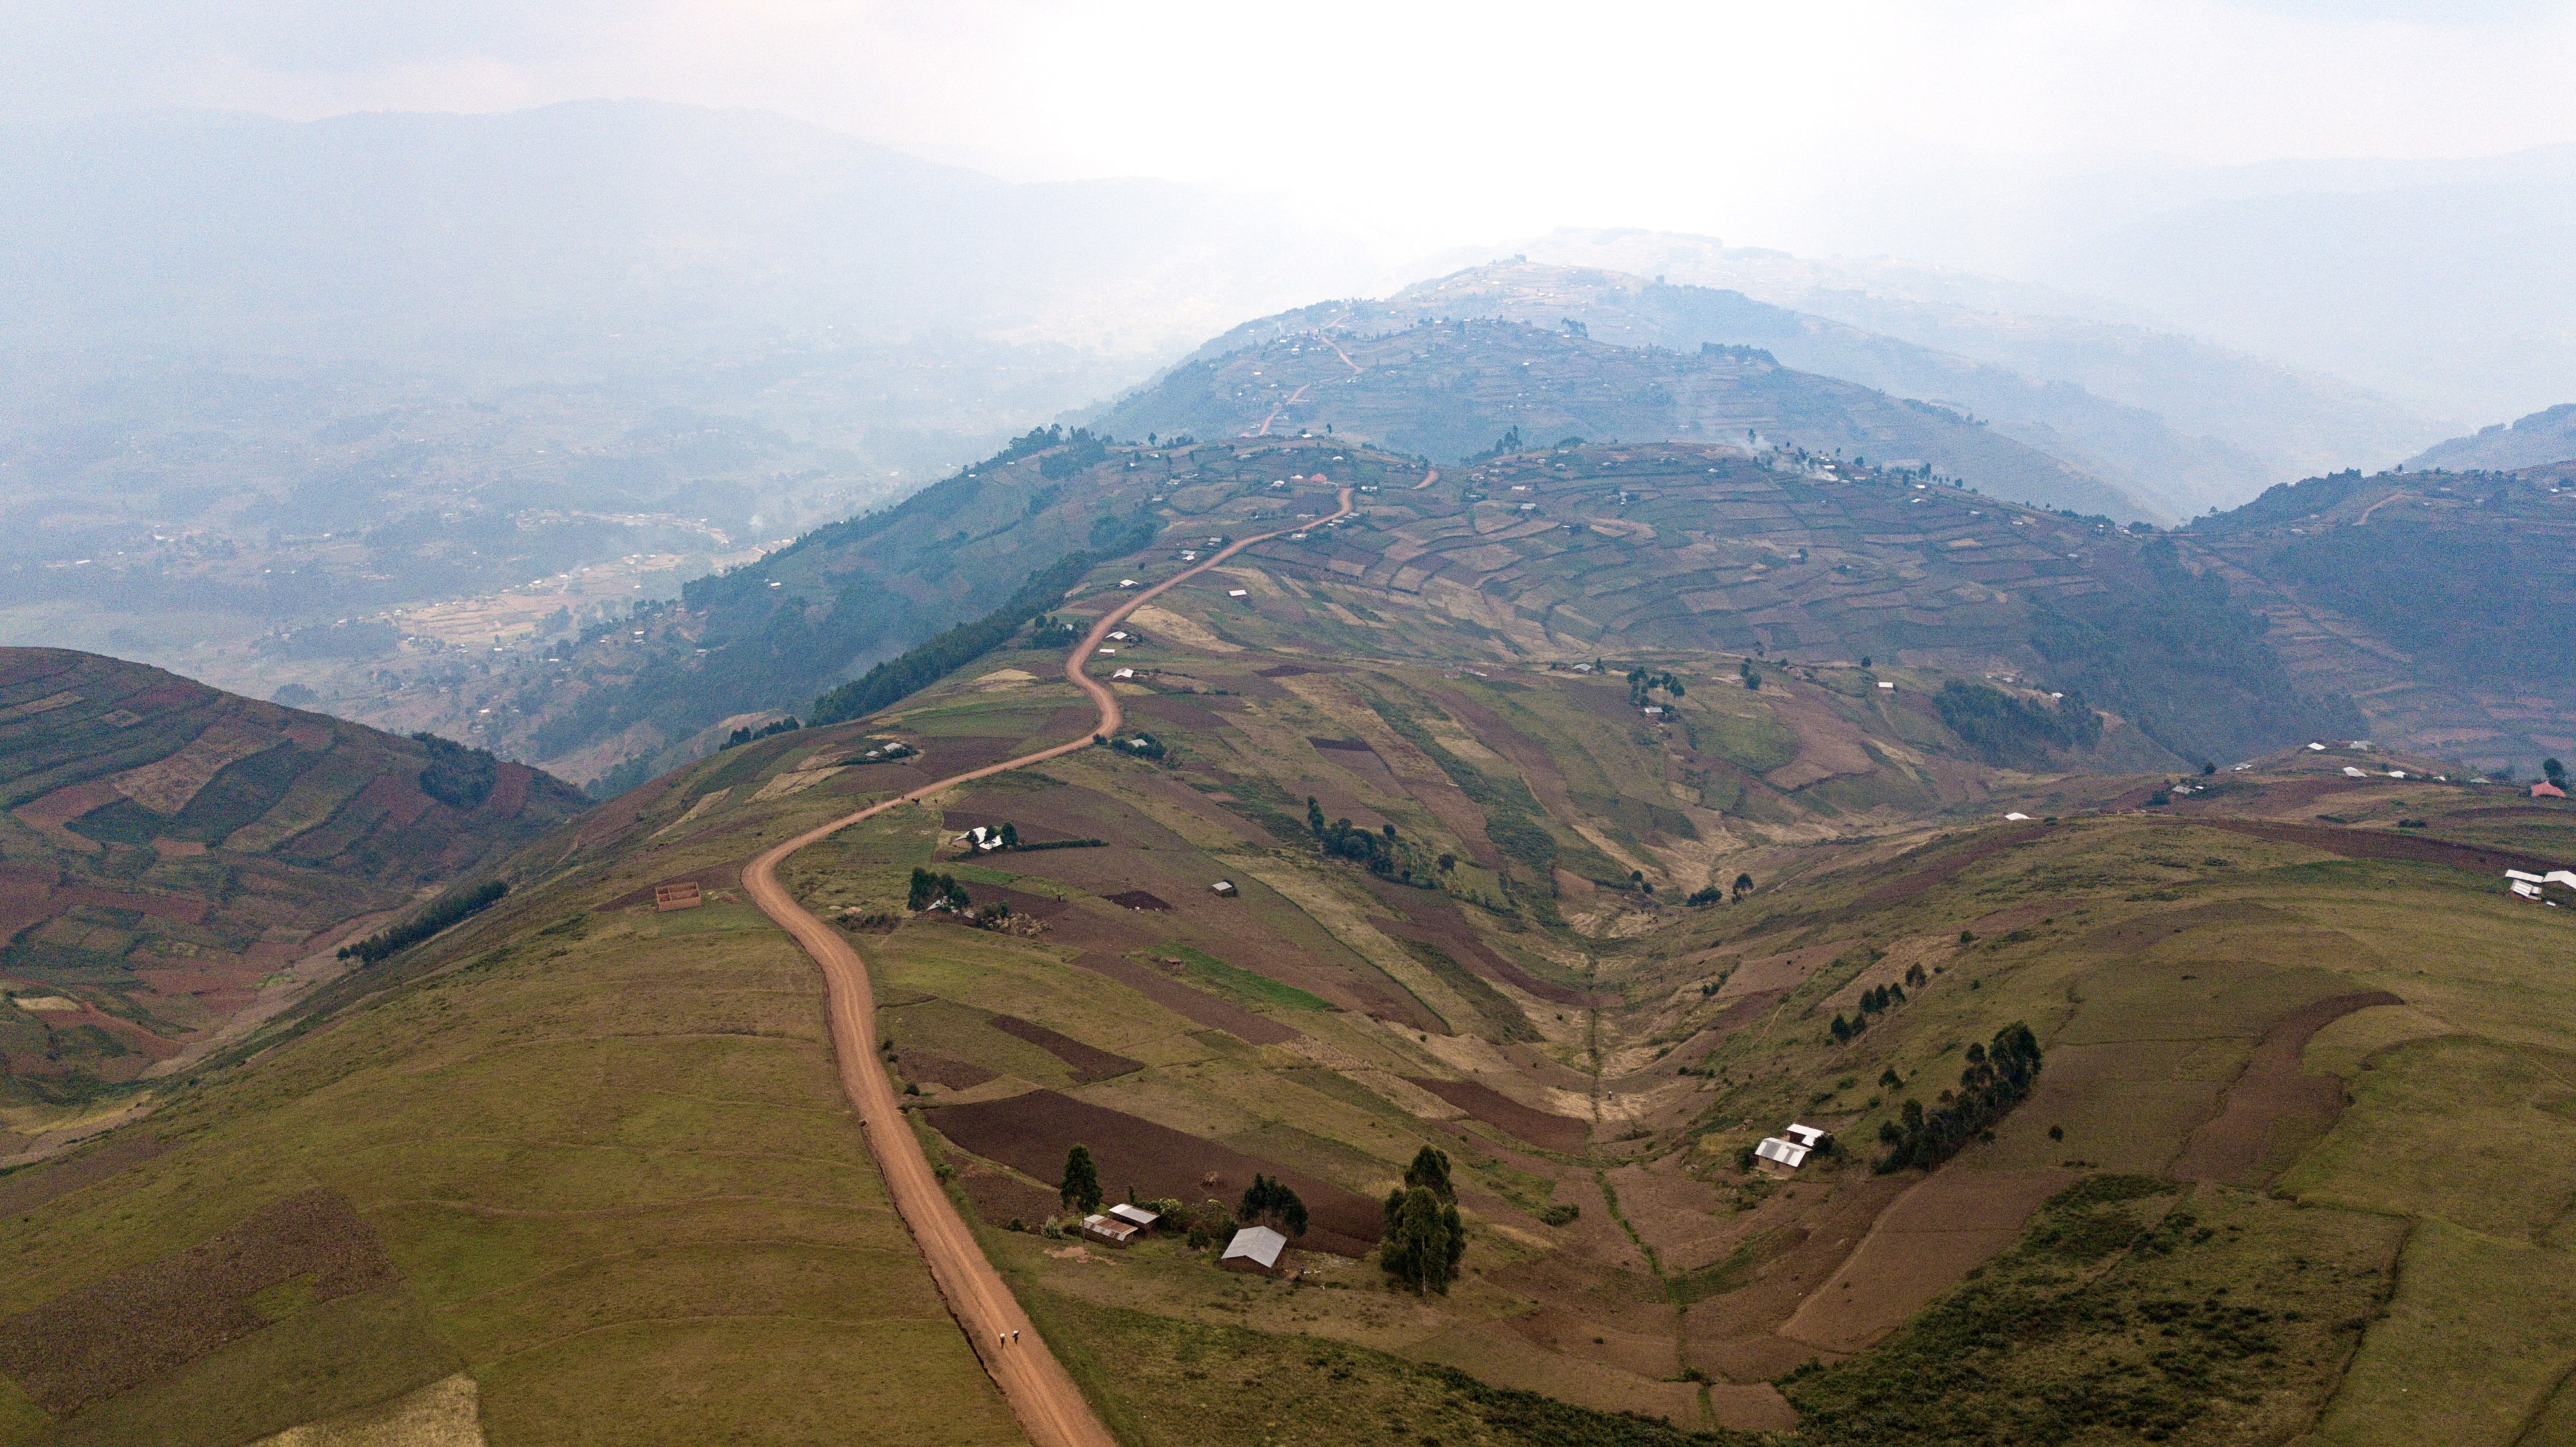 An aerial view of the hilltops and rural roads in Uganda.